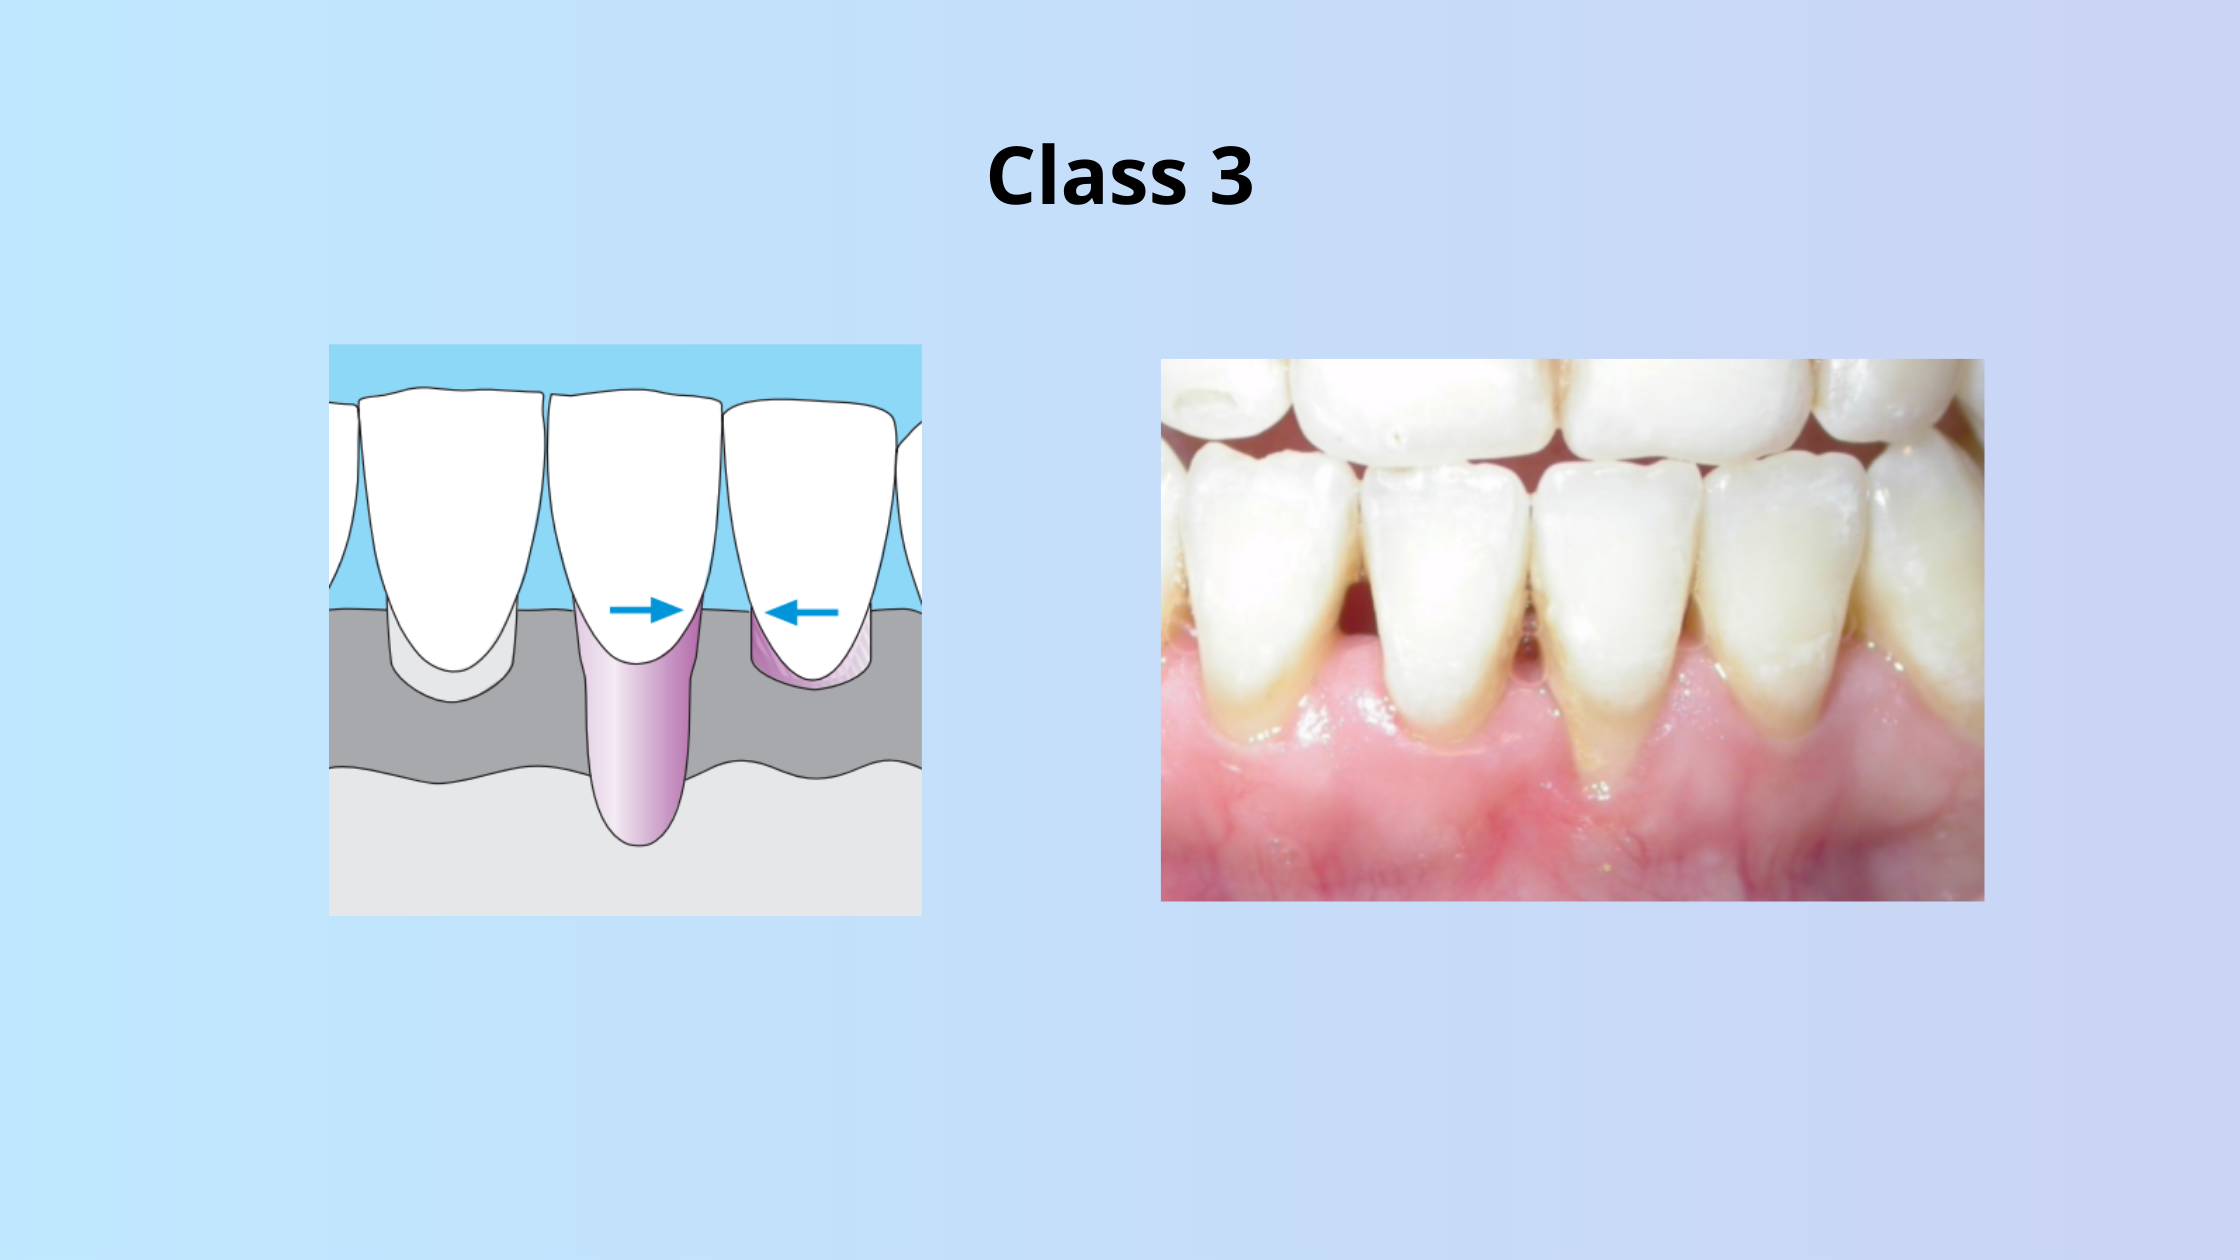 Class 3 of gingival recession according to Miller